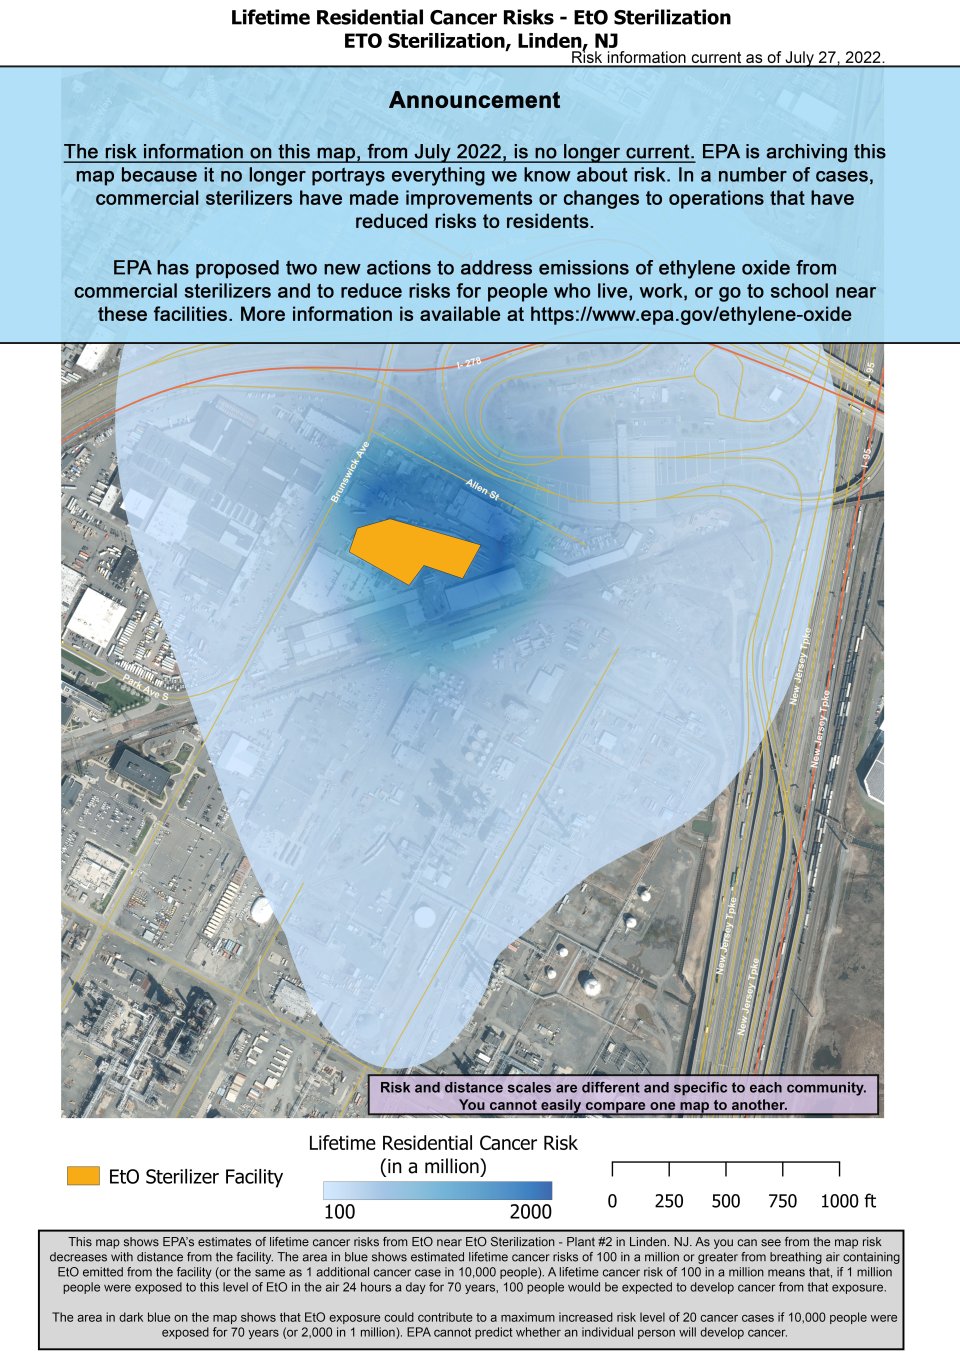 This map shows EPA’s estimate of lifetime cancer risks from breathing ethylene oxide near EtO Sterilization-Plant #2 located at 2500 Brunswick Avenue Linden, NJ.  Estimated cancer risk decreases with distance from the facility.  Nearest the facility, the estimated lifetime cancer risk is 2,000 in a million. This drops to 100 in a million and extends near I-278 to the west, J. Christian Bollwage Finance Academy to the north, the New Jersey Turnpike to the east, and Linden Cogeneration Plant to the south.  